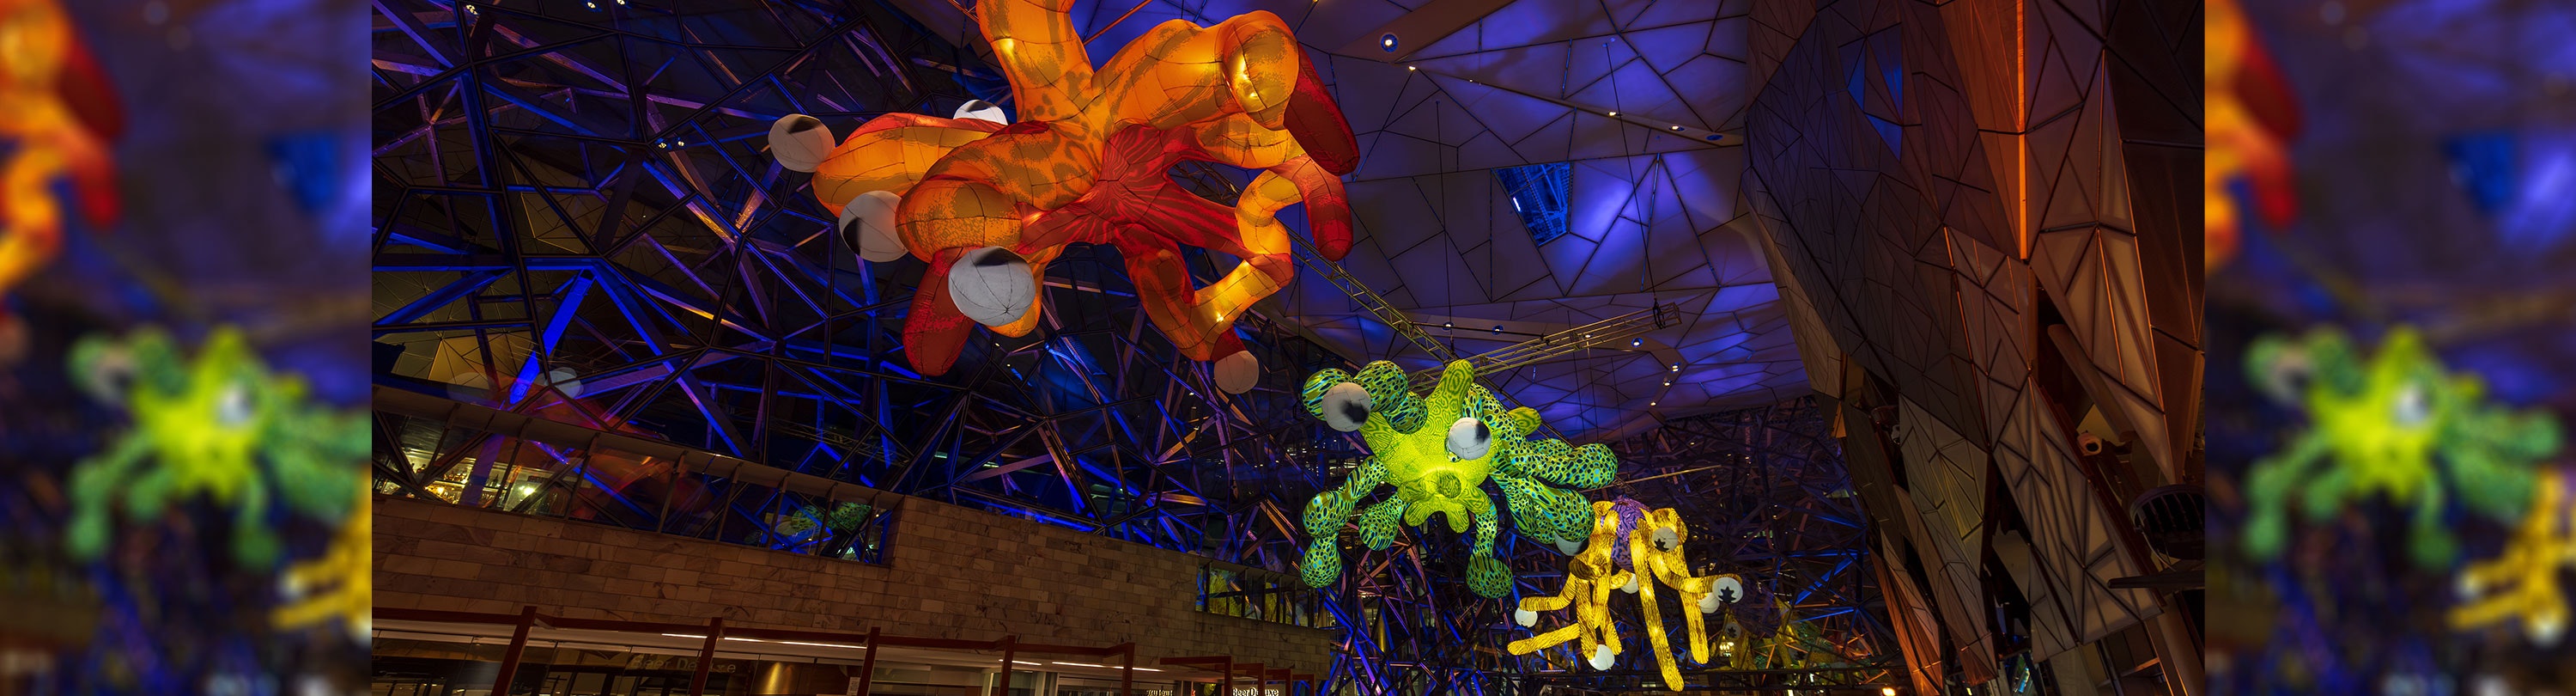 Colourful inflatable underwater sea creatures are hung from the roof of the Atrium